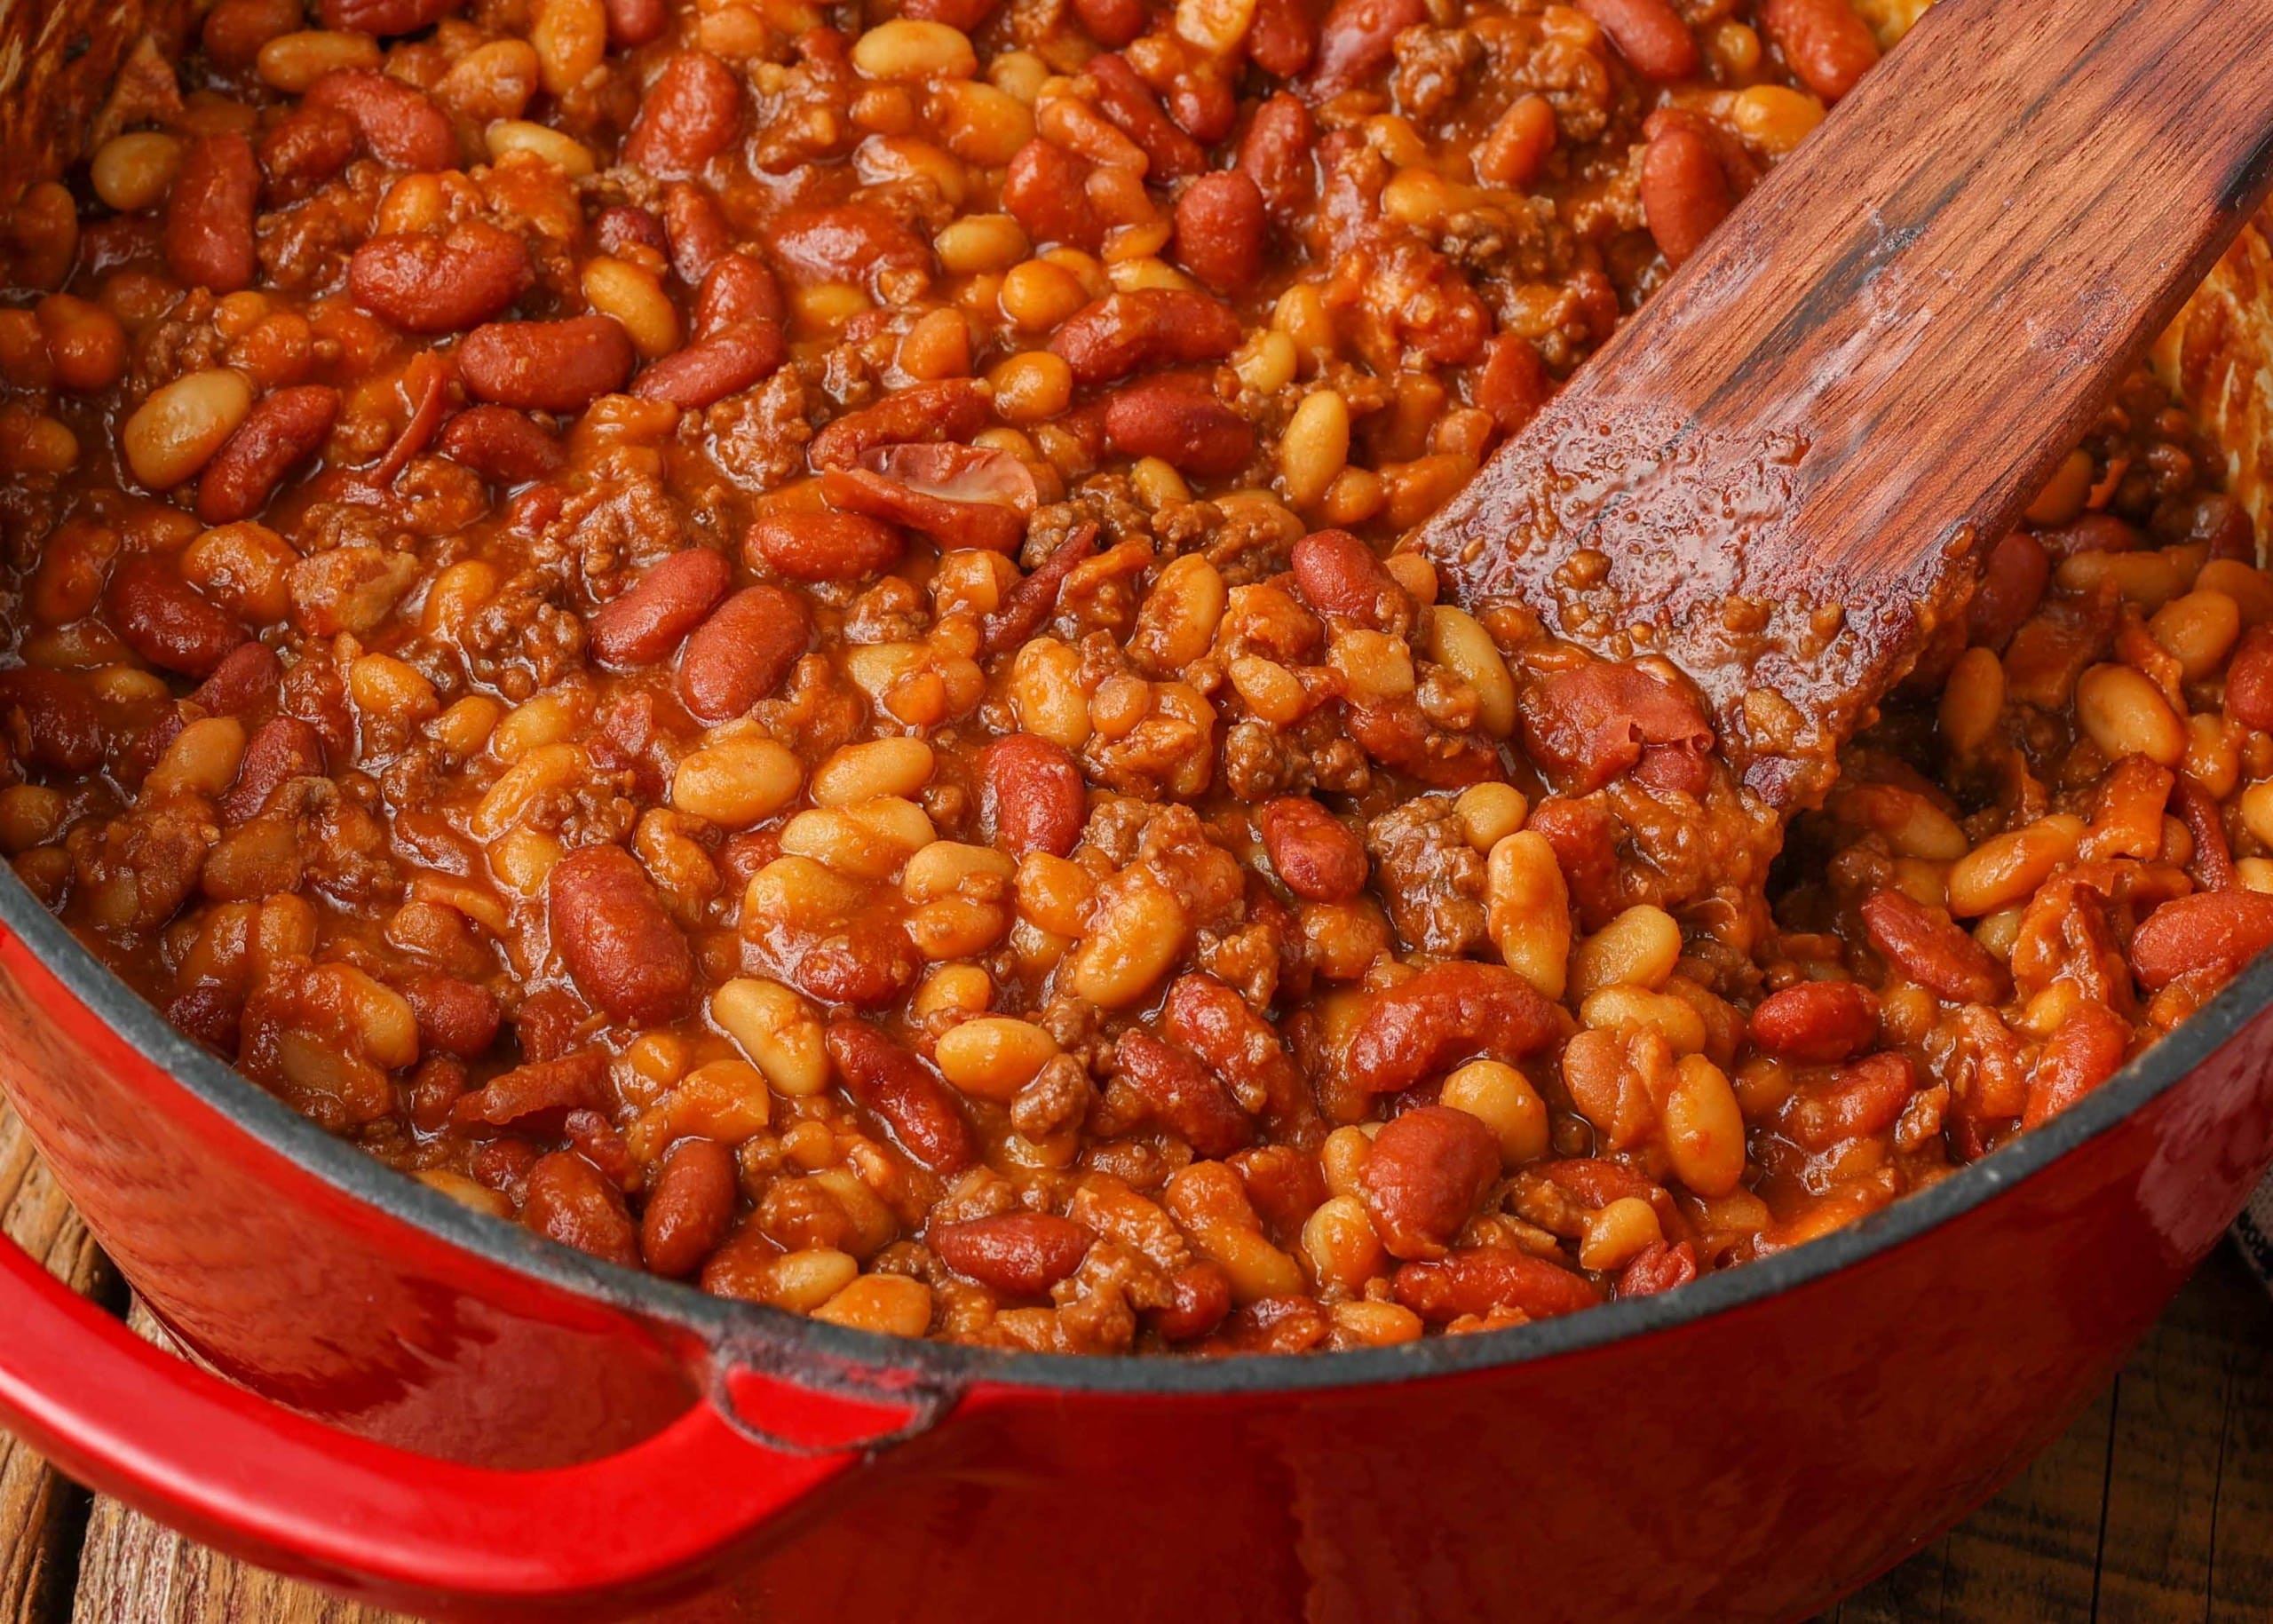 https://chocolatewithgrace.com/wp-content/uploads/2025/04/Cowboy-Baked-Beans-CWG-12-1-of-1-scaled.jpg